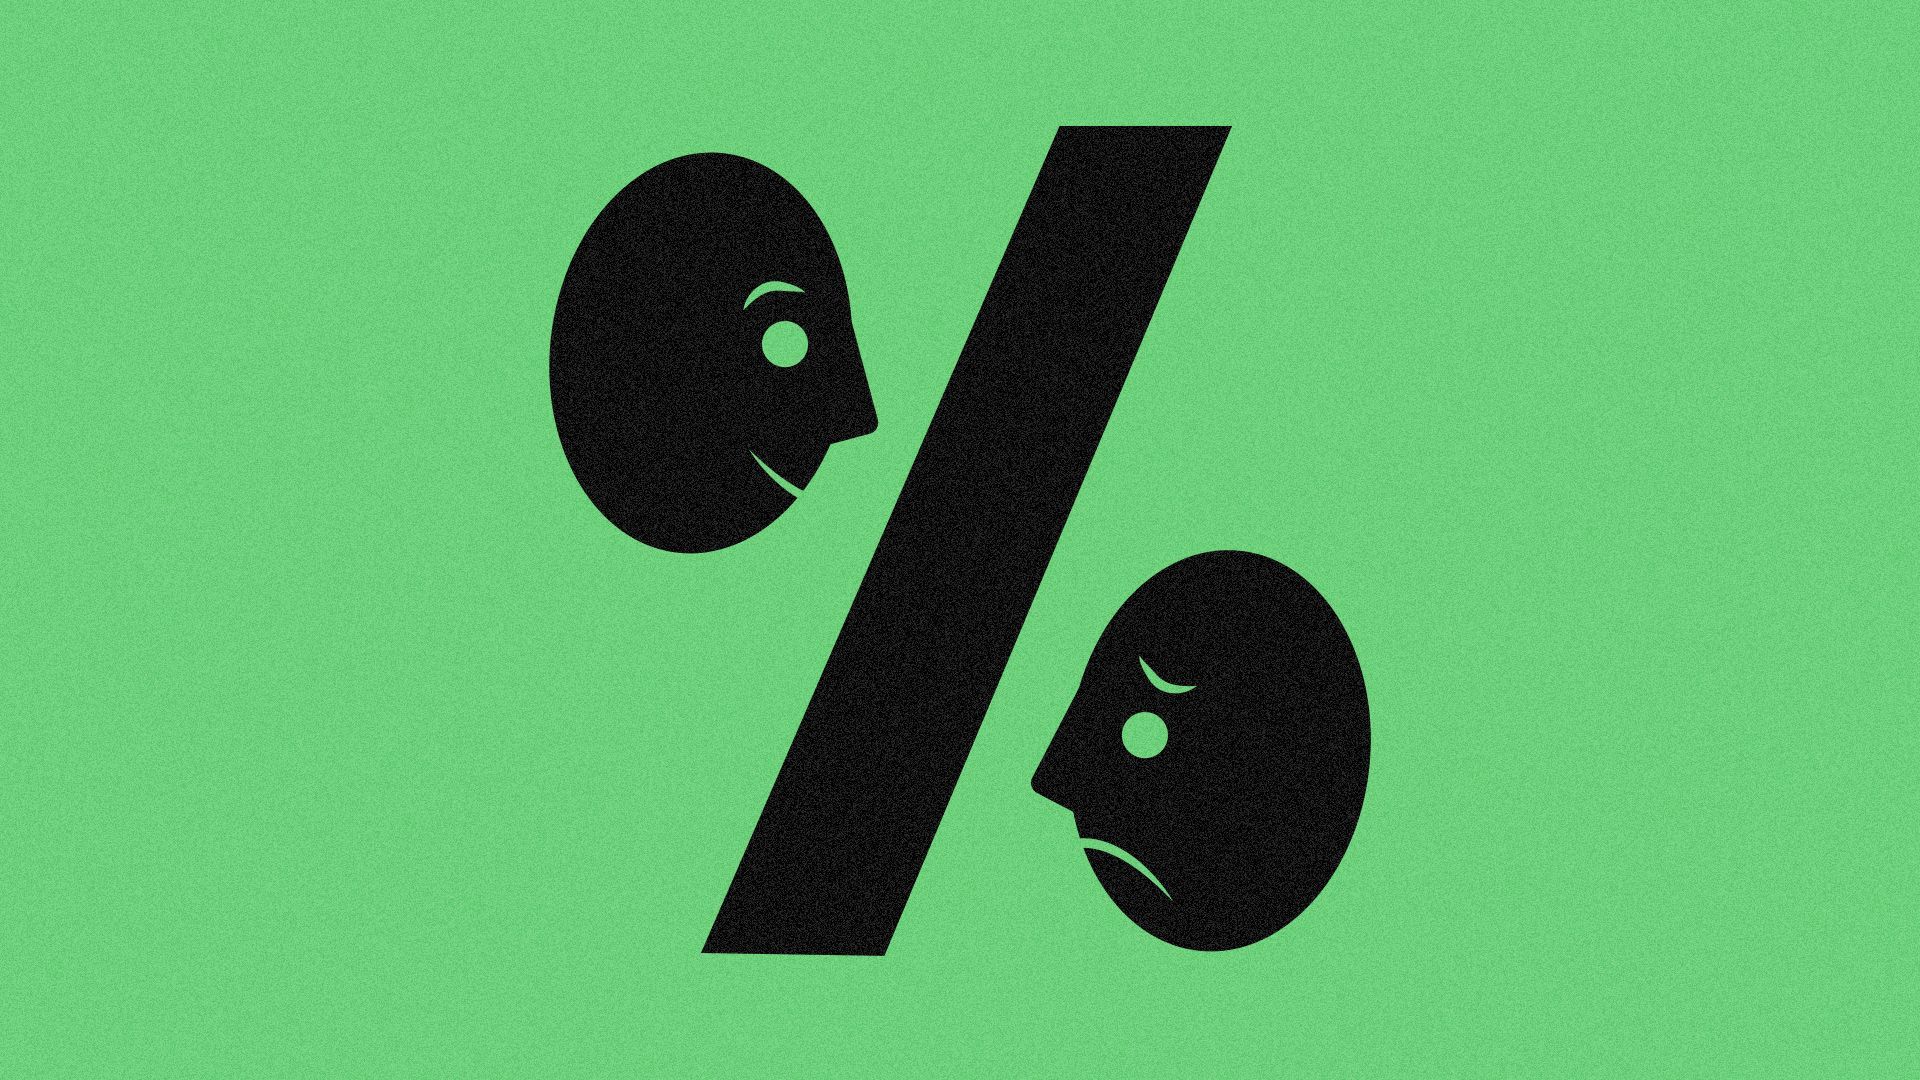 Illustration of a percent sign with a smiling and frowning face forming the zeroes.